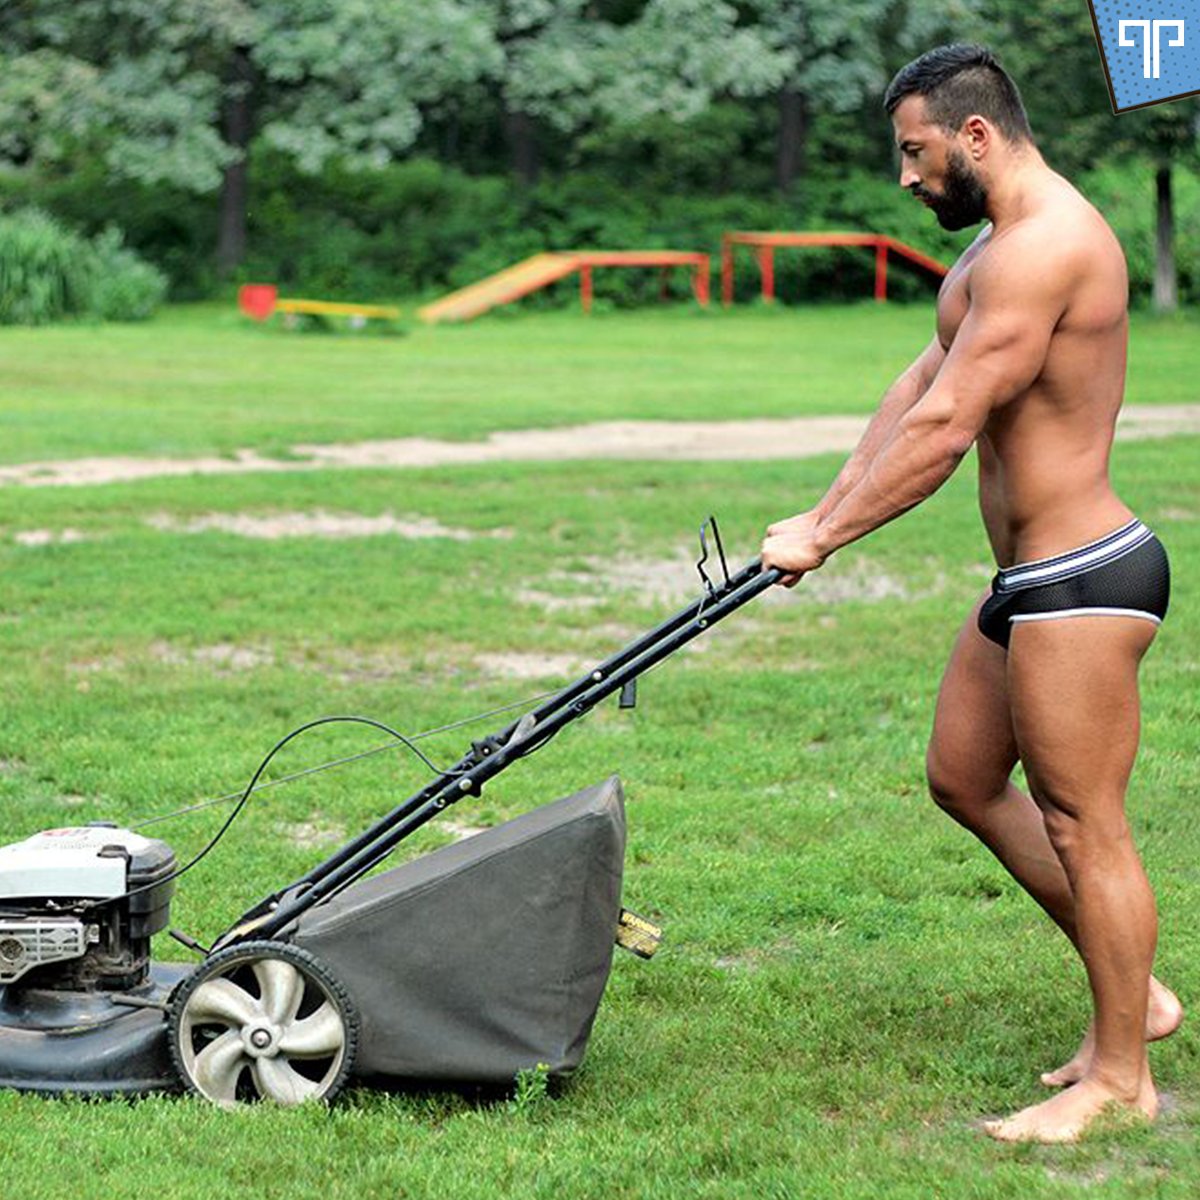 Mowing lawn naked - 🧡 Mowing the lawn naked NudeChrissy Blog - I am an al....